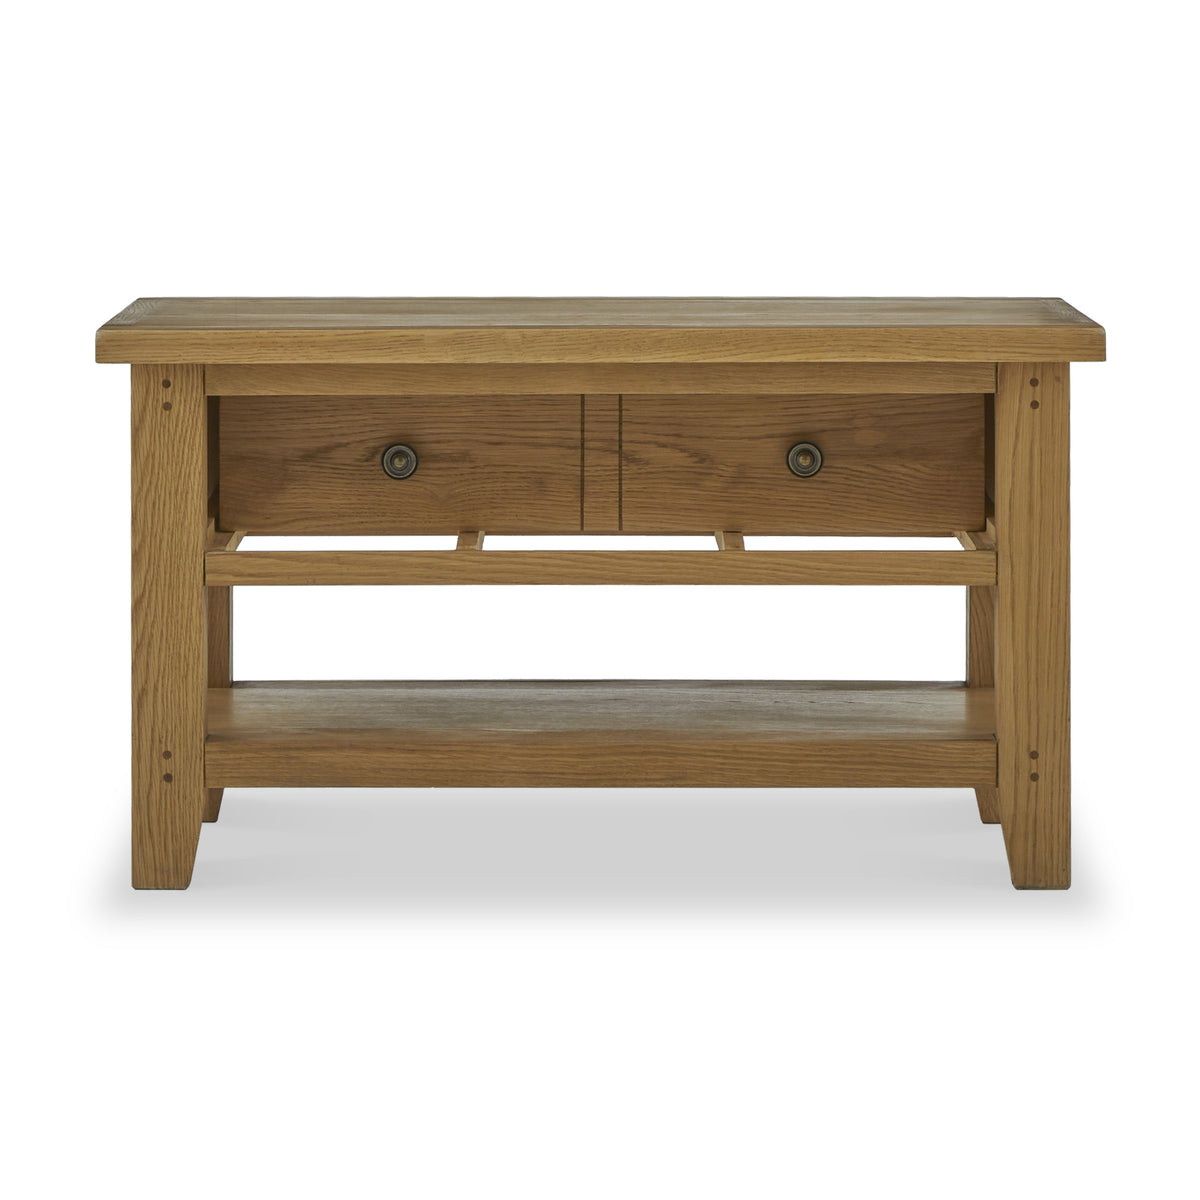 Oak coffee table with two drawers and a lower shelf, isolated against a white background.